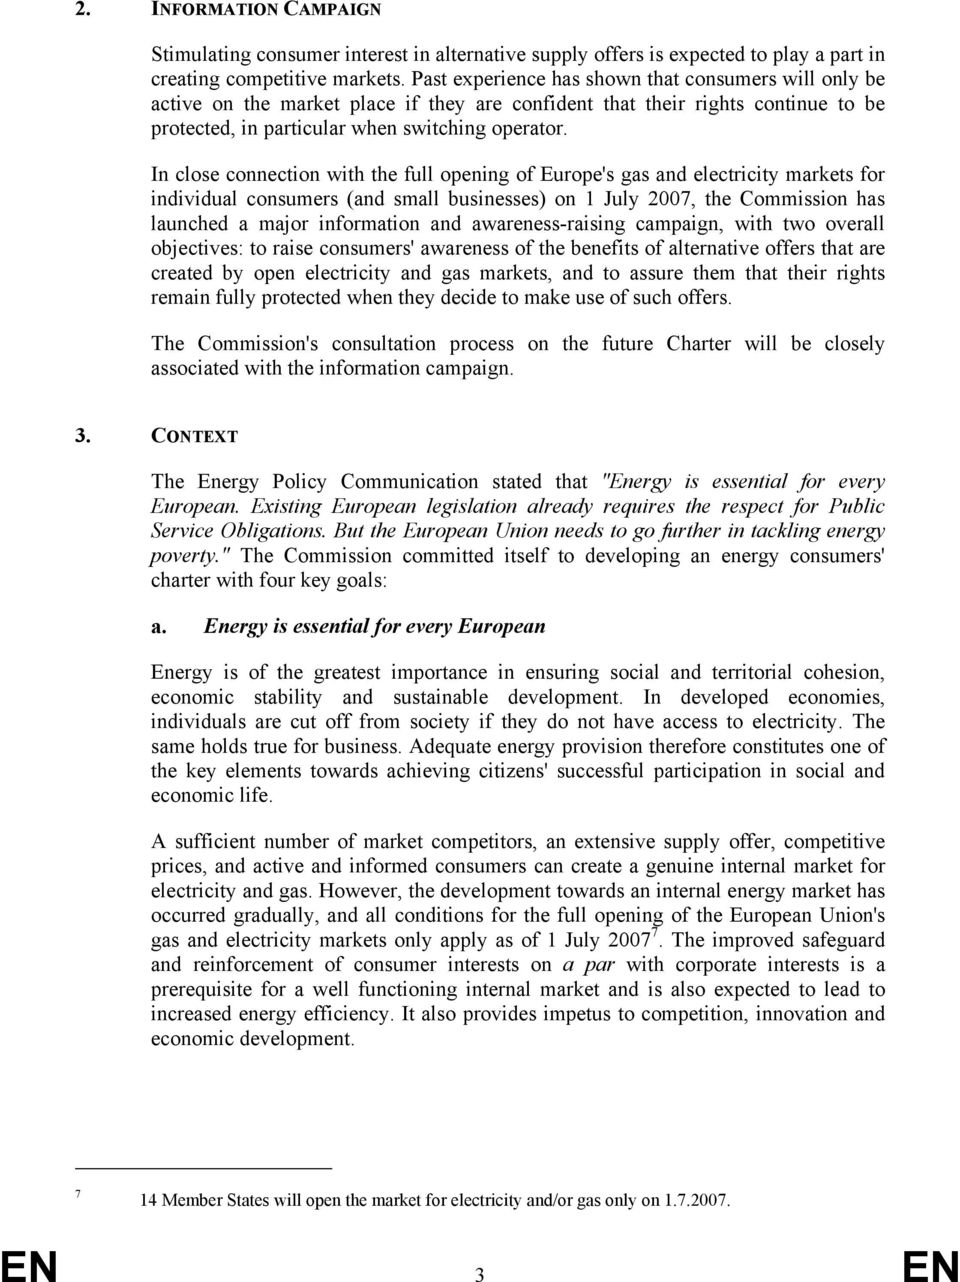 In close connection with the full opening of Europe's gas and electricity markets for individual consumers (and small businesses) on 1 July 2007, the Commission has launched a major information and